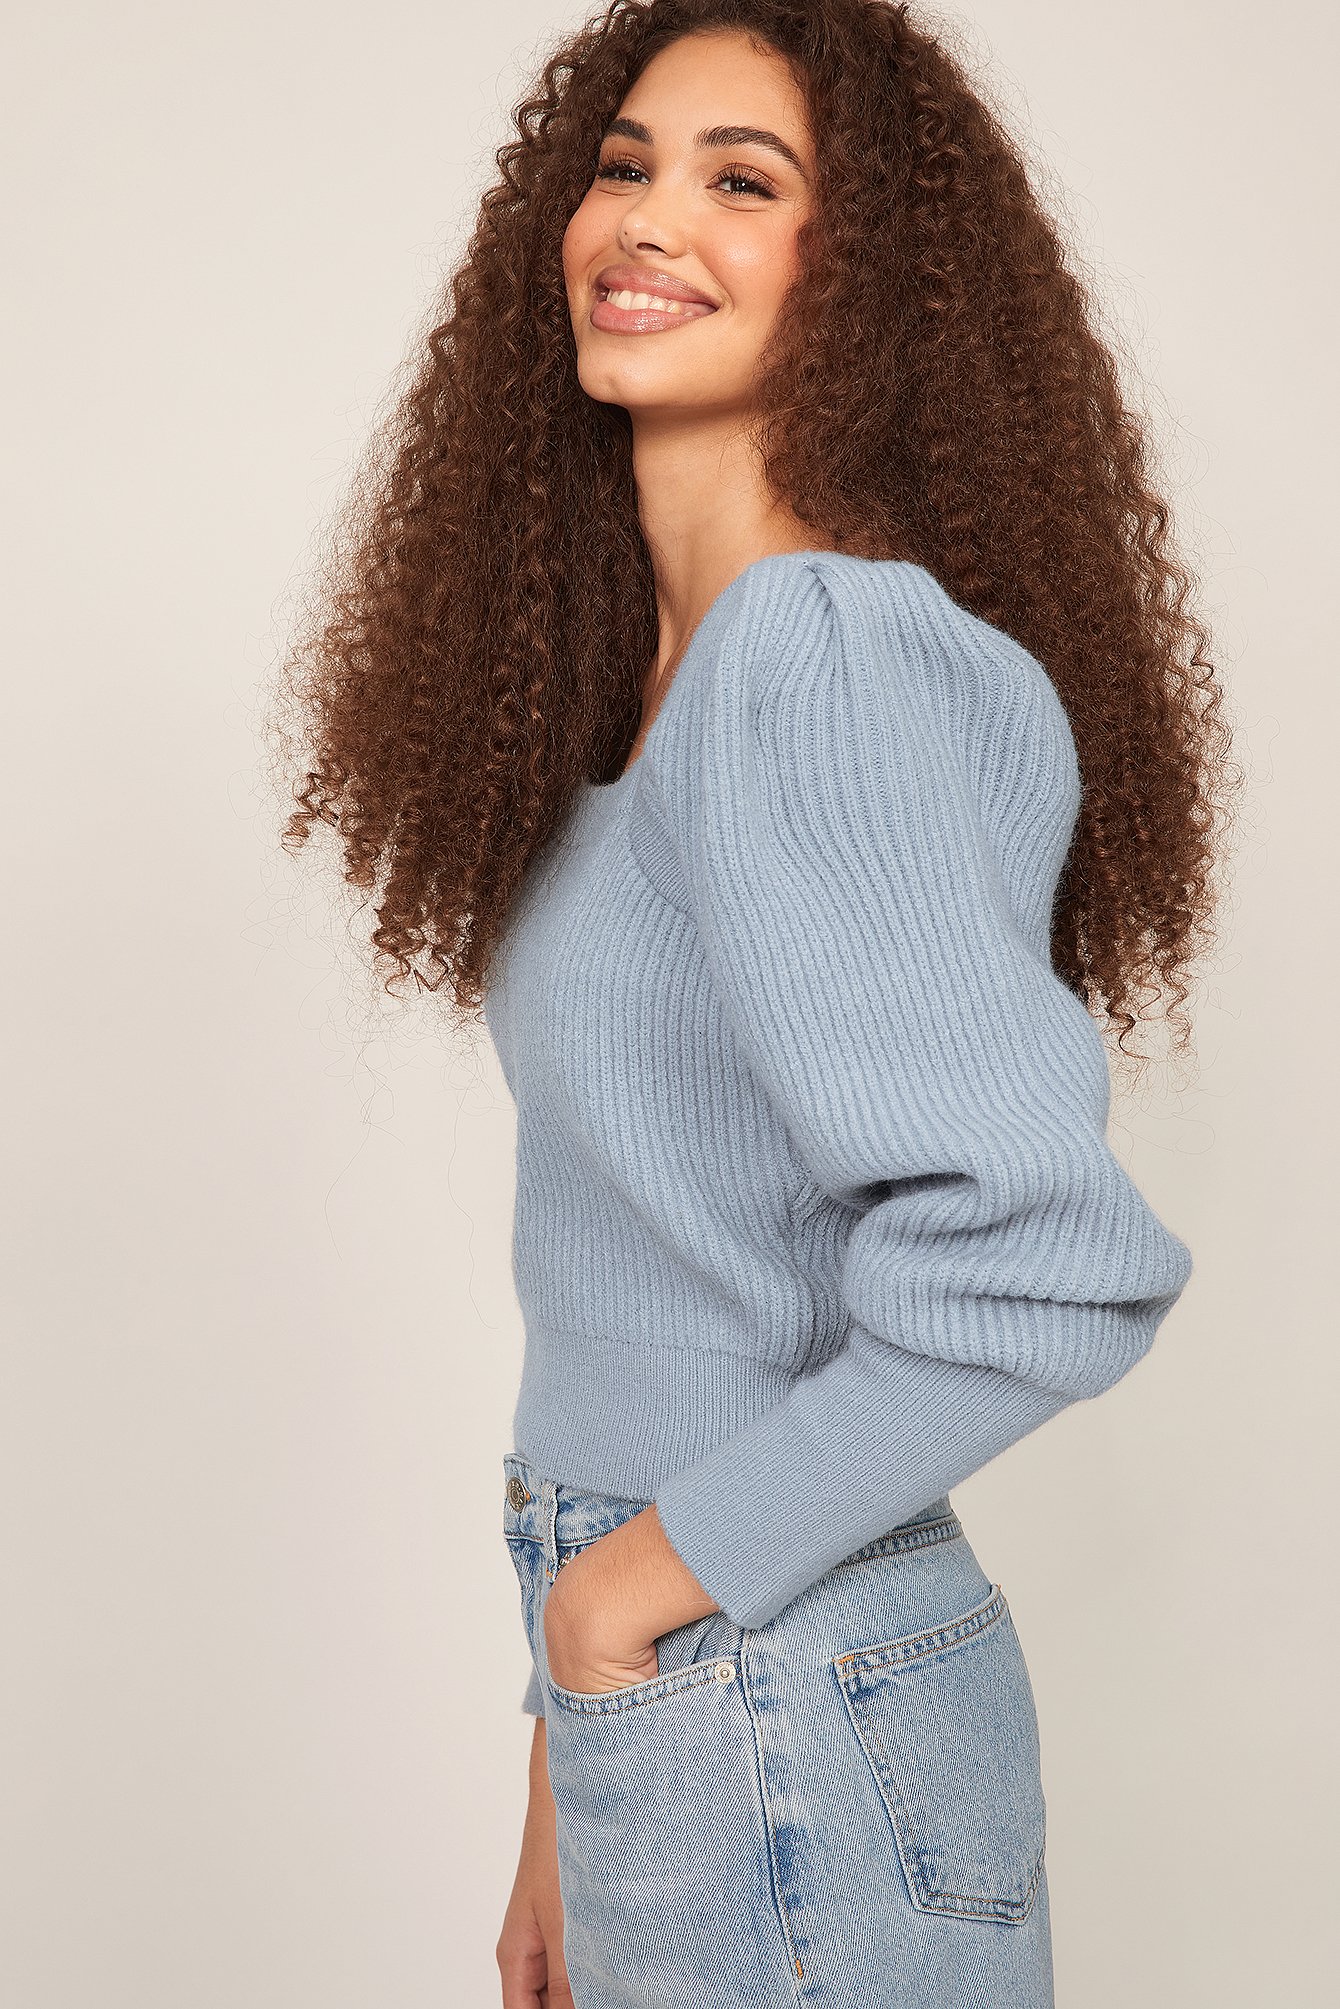 Dusty Blue Square Neck Cable Knitted Sweater